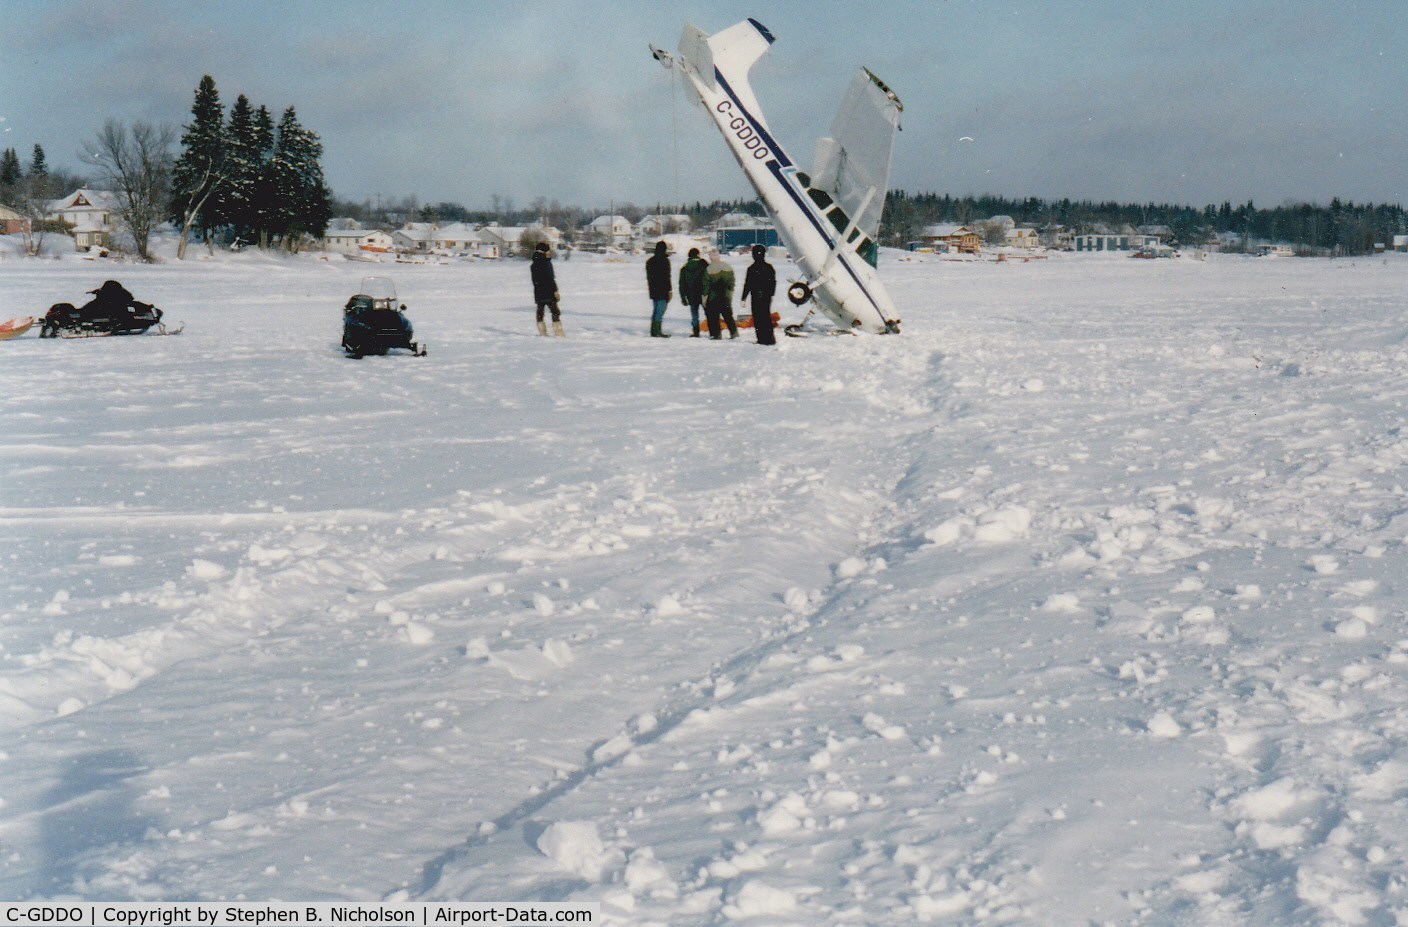 C-GDDO, 1976 Cessna 180J Skywagon C/N 180-52652, I believe the skid marks in the snow were made by the craft's nose